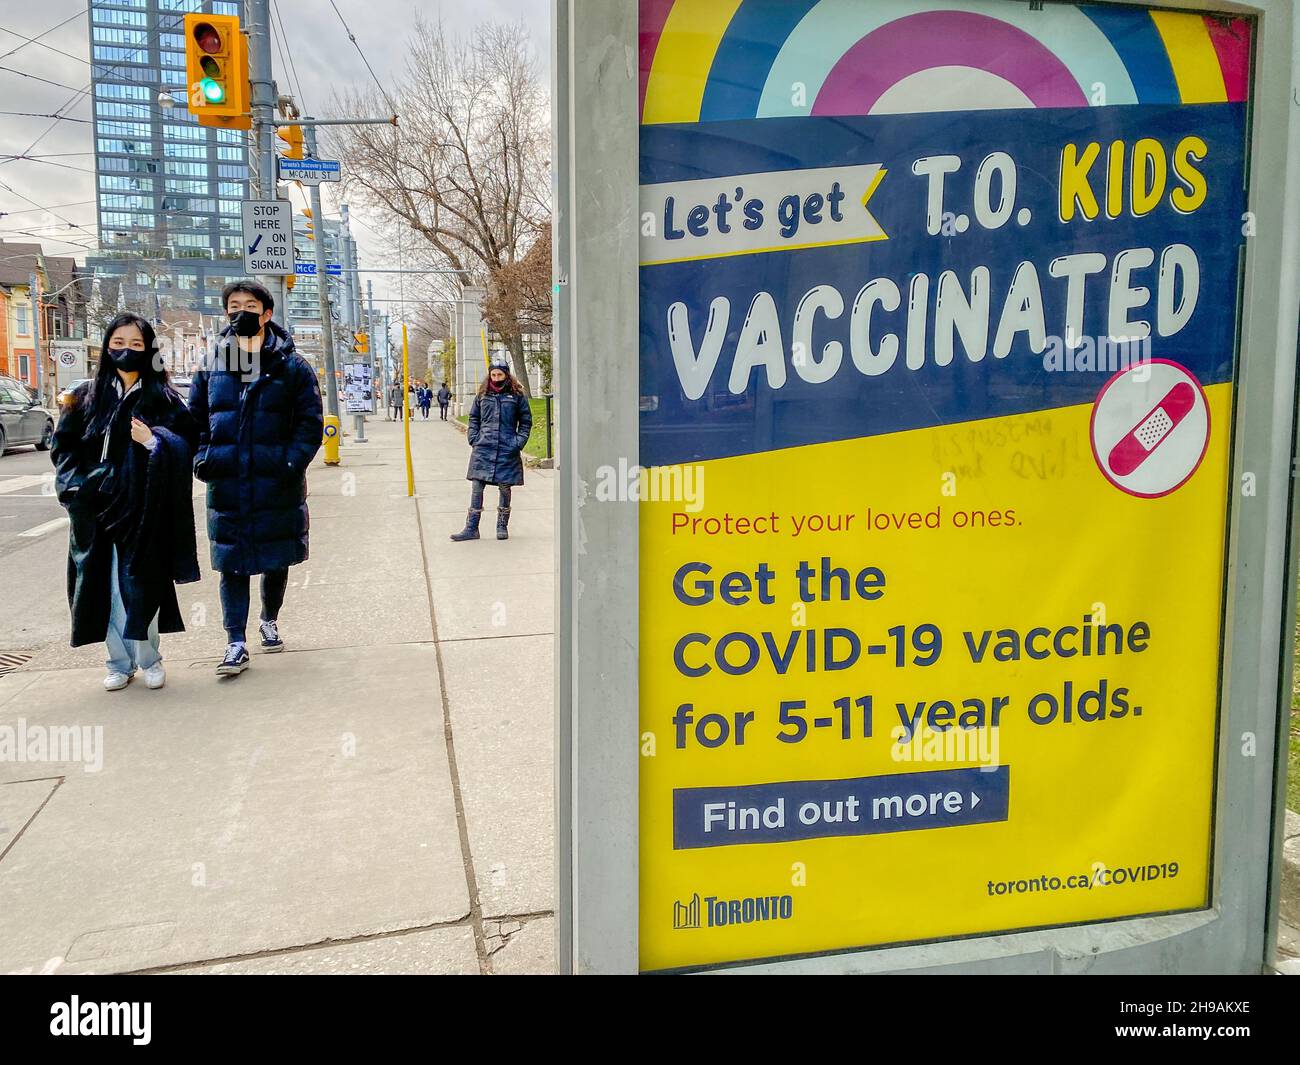 SIGNAGE IN BUS SHELTER PROMOTING COVID-19 VACCINATION FOR CHILDREN AGE 5 TO 11 YEARS OLD. Stock Photo